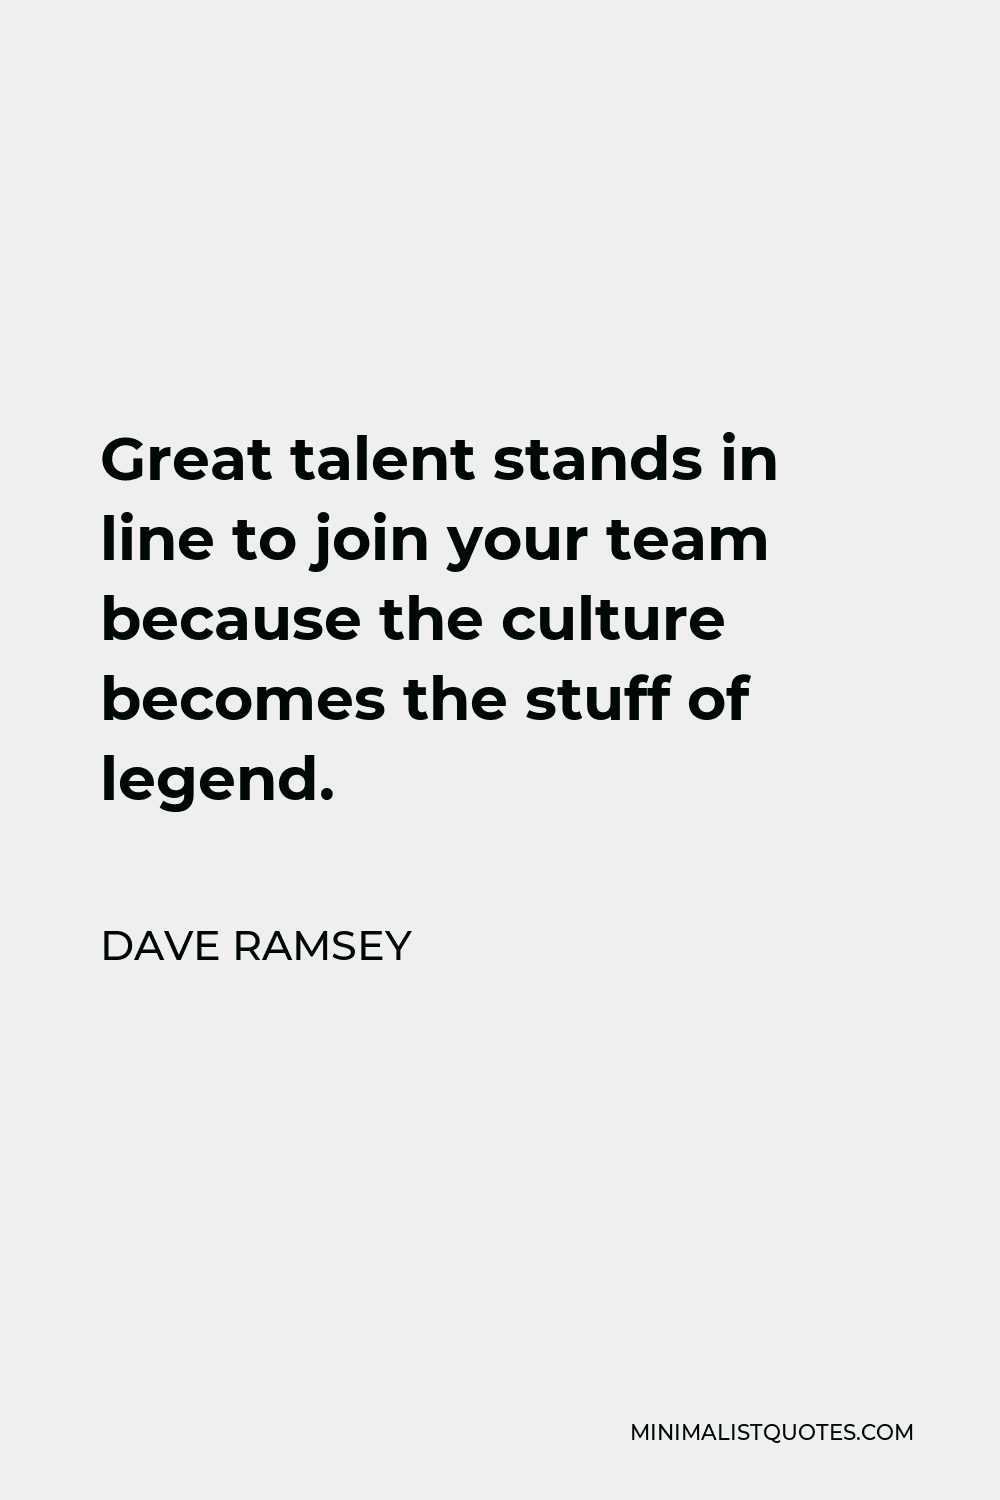 Dave Ramsey Quote - Great talent stands in line to join your team because the culture becomes the stuff of legend.